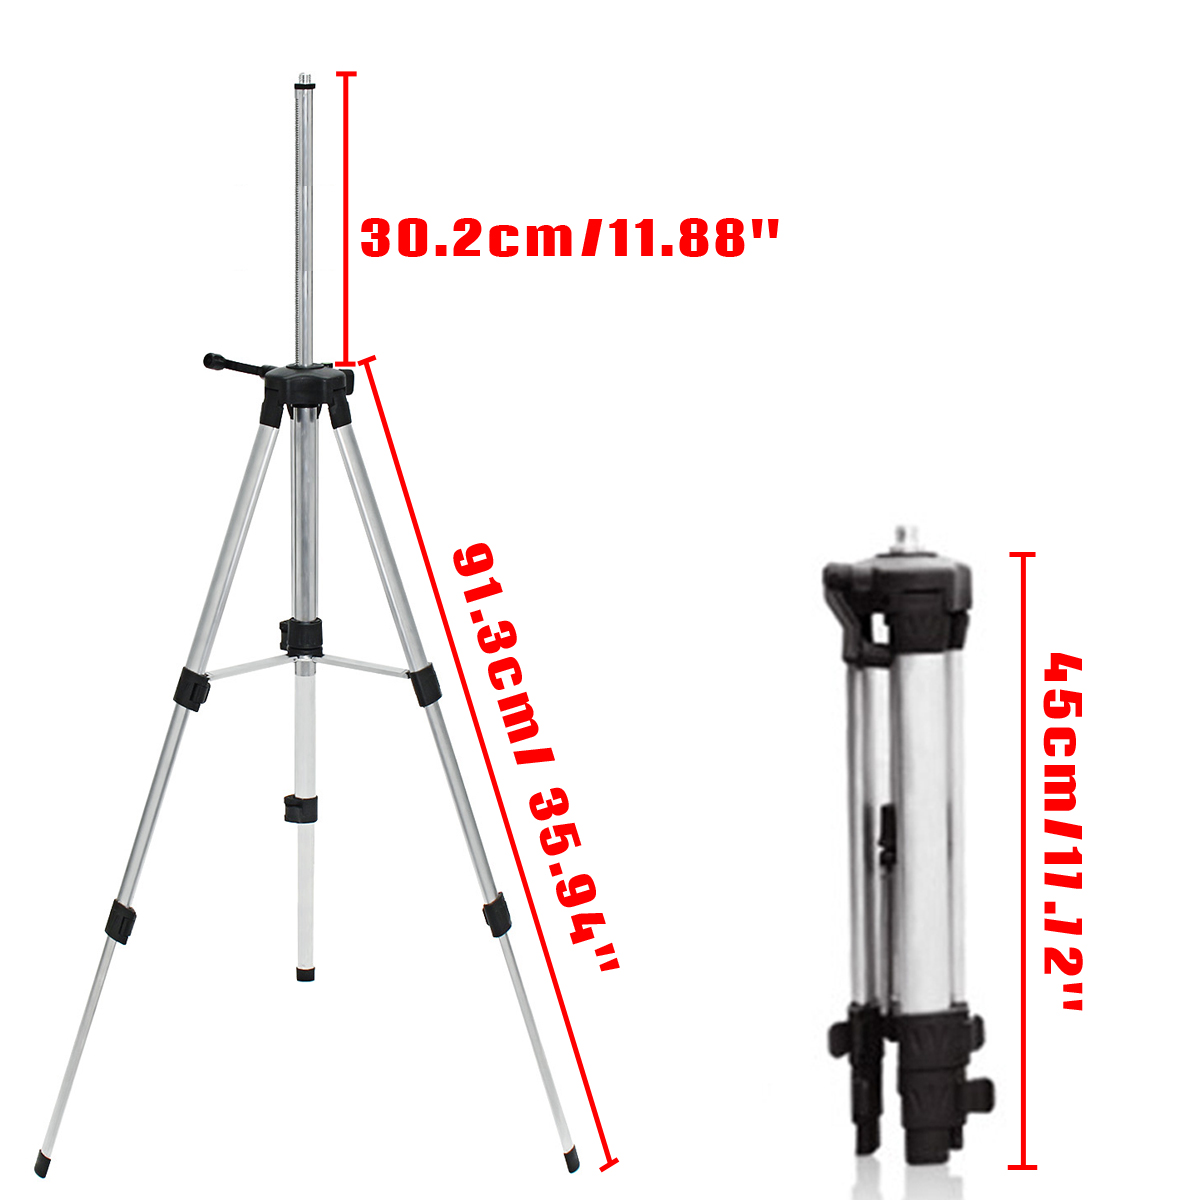 Professional-Tripod-Adjustable-for-Rotary-Laser-Leveling-Measuring-Tool-Instruments-Line-Level-Exten-1616473-3